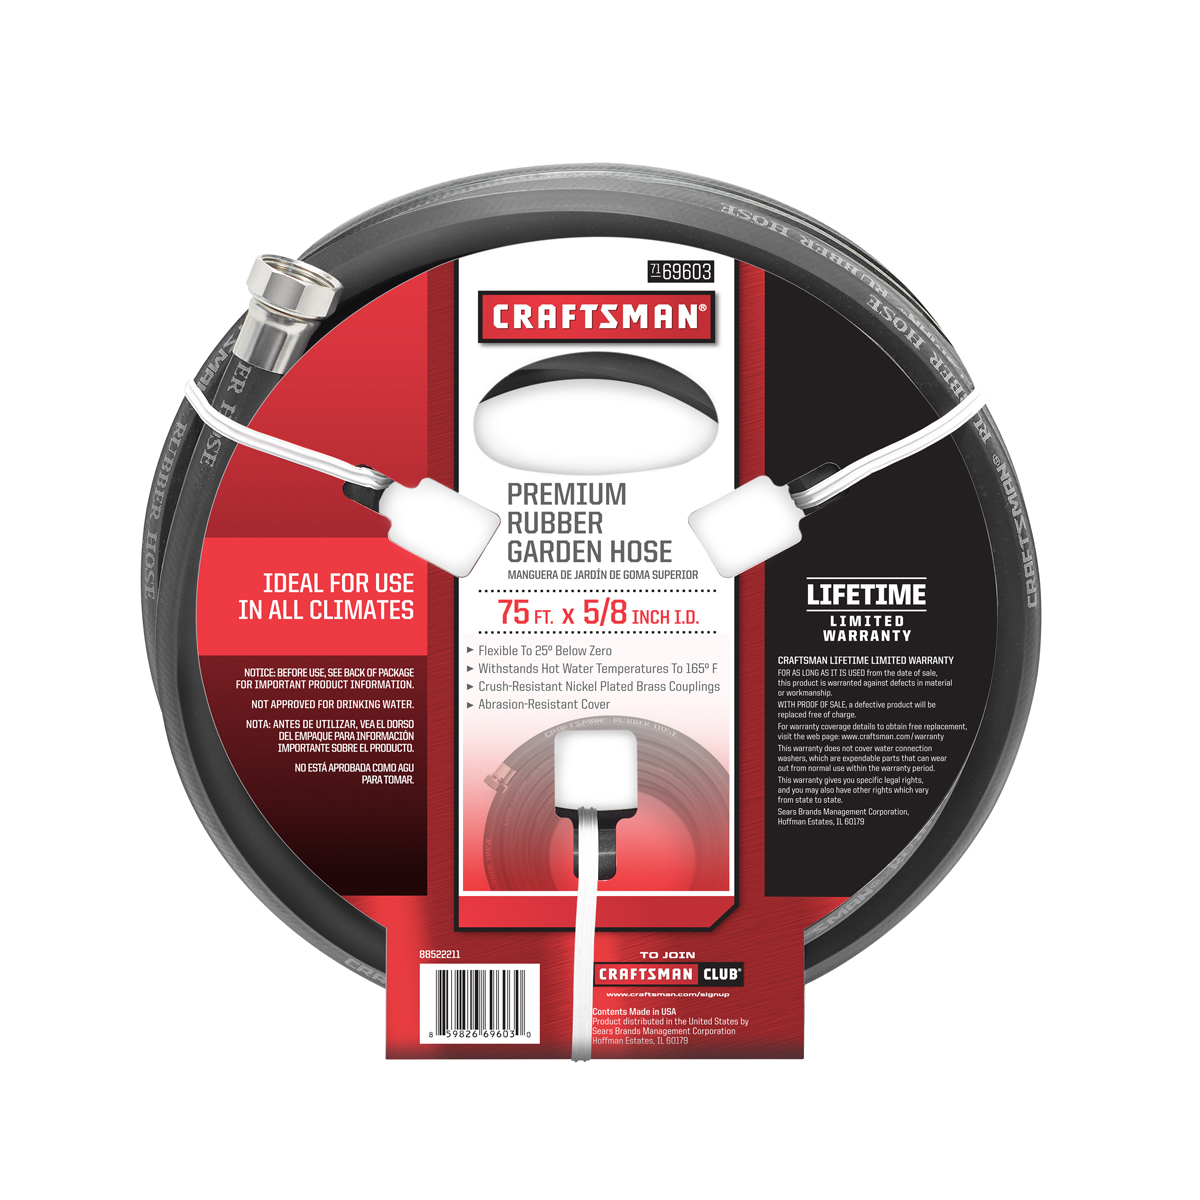 Sears: Craftsman 75′ x 5/8′ Garden Hose Only $25.99! Plus SYWR Points!